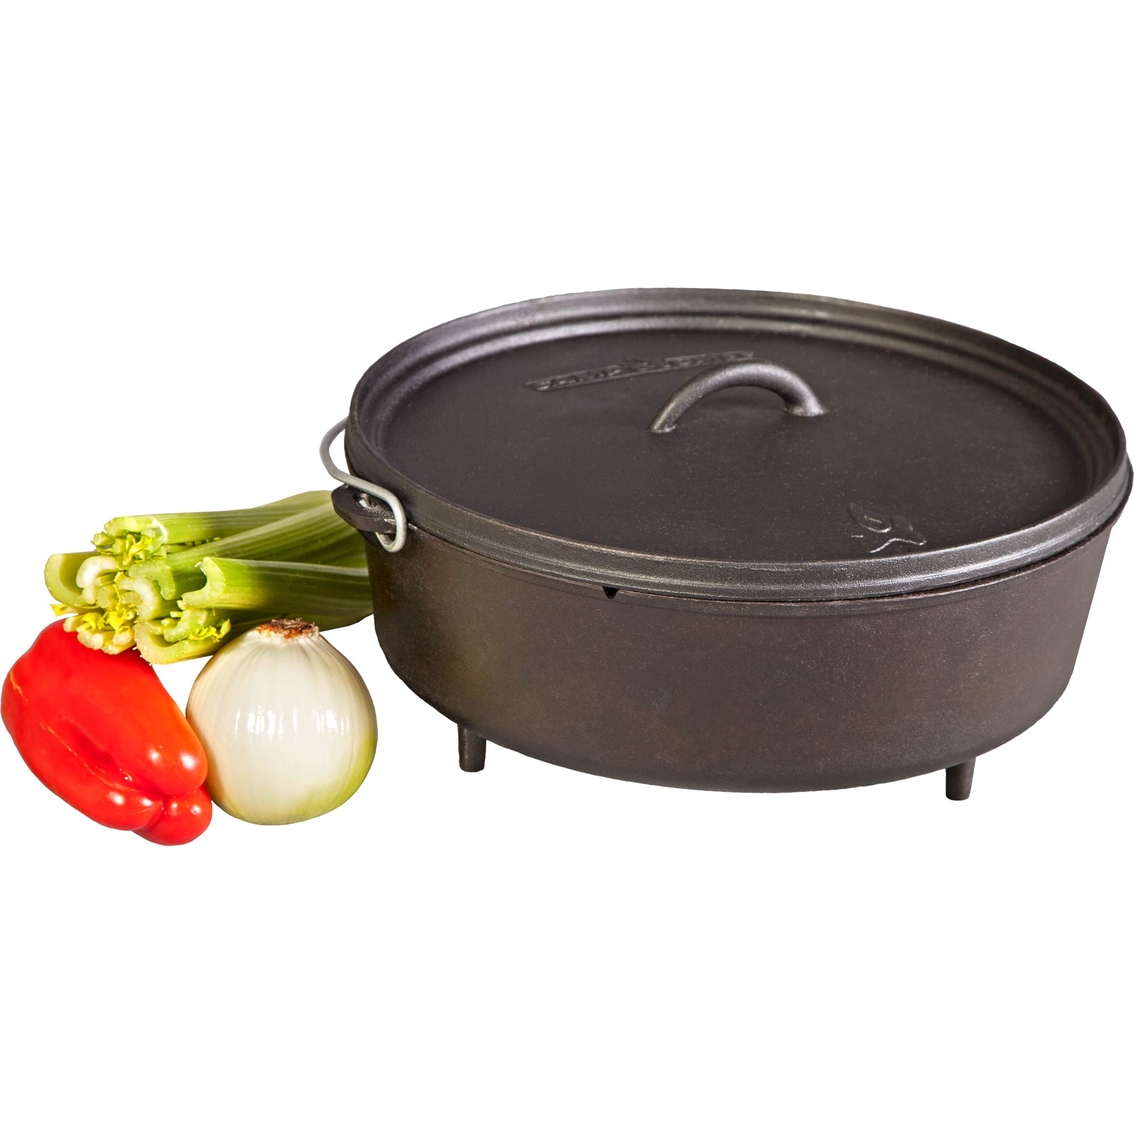 Camp Chef 14 in. Cast Iron Classic Dutch Oven - Image 4 of 4